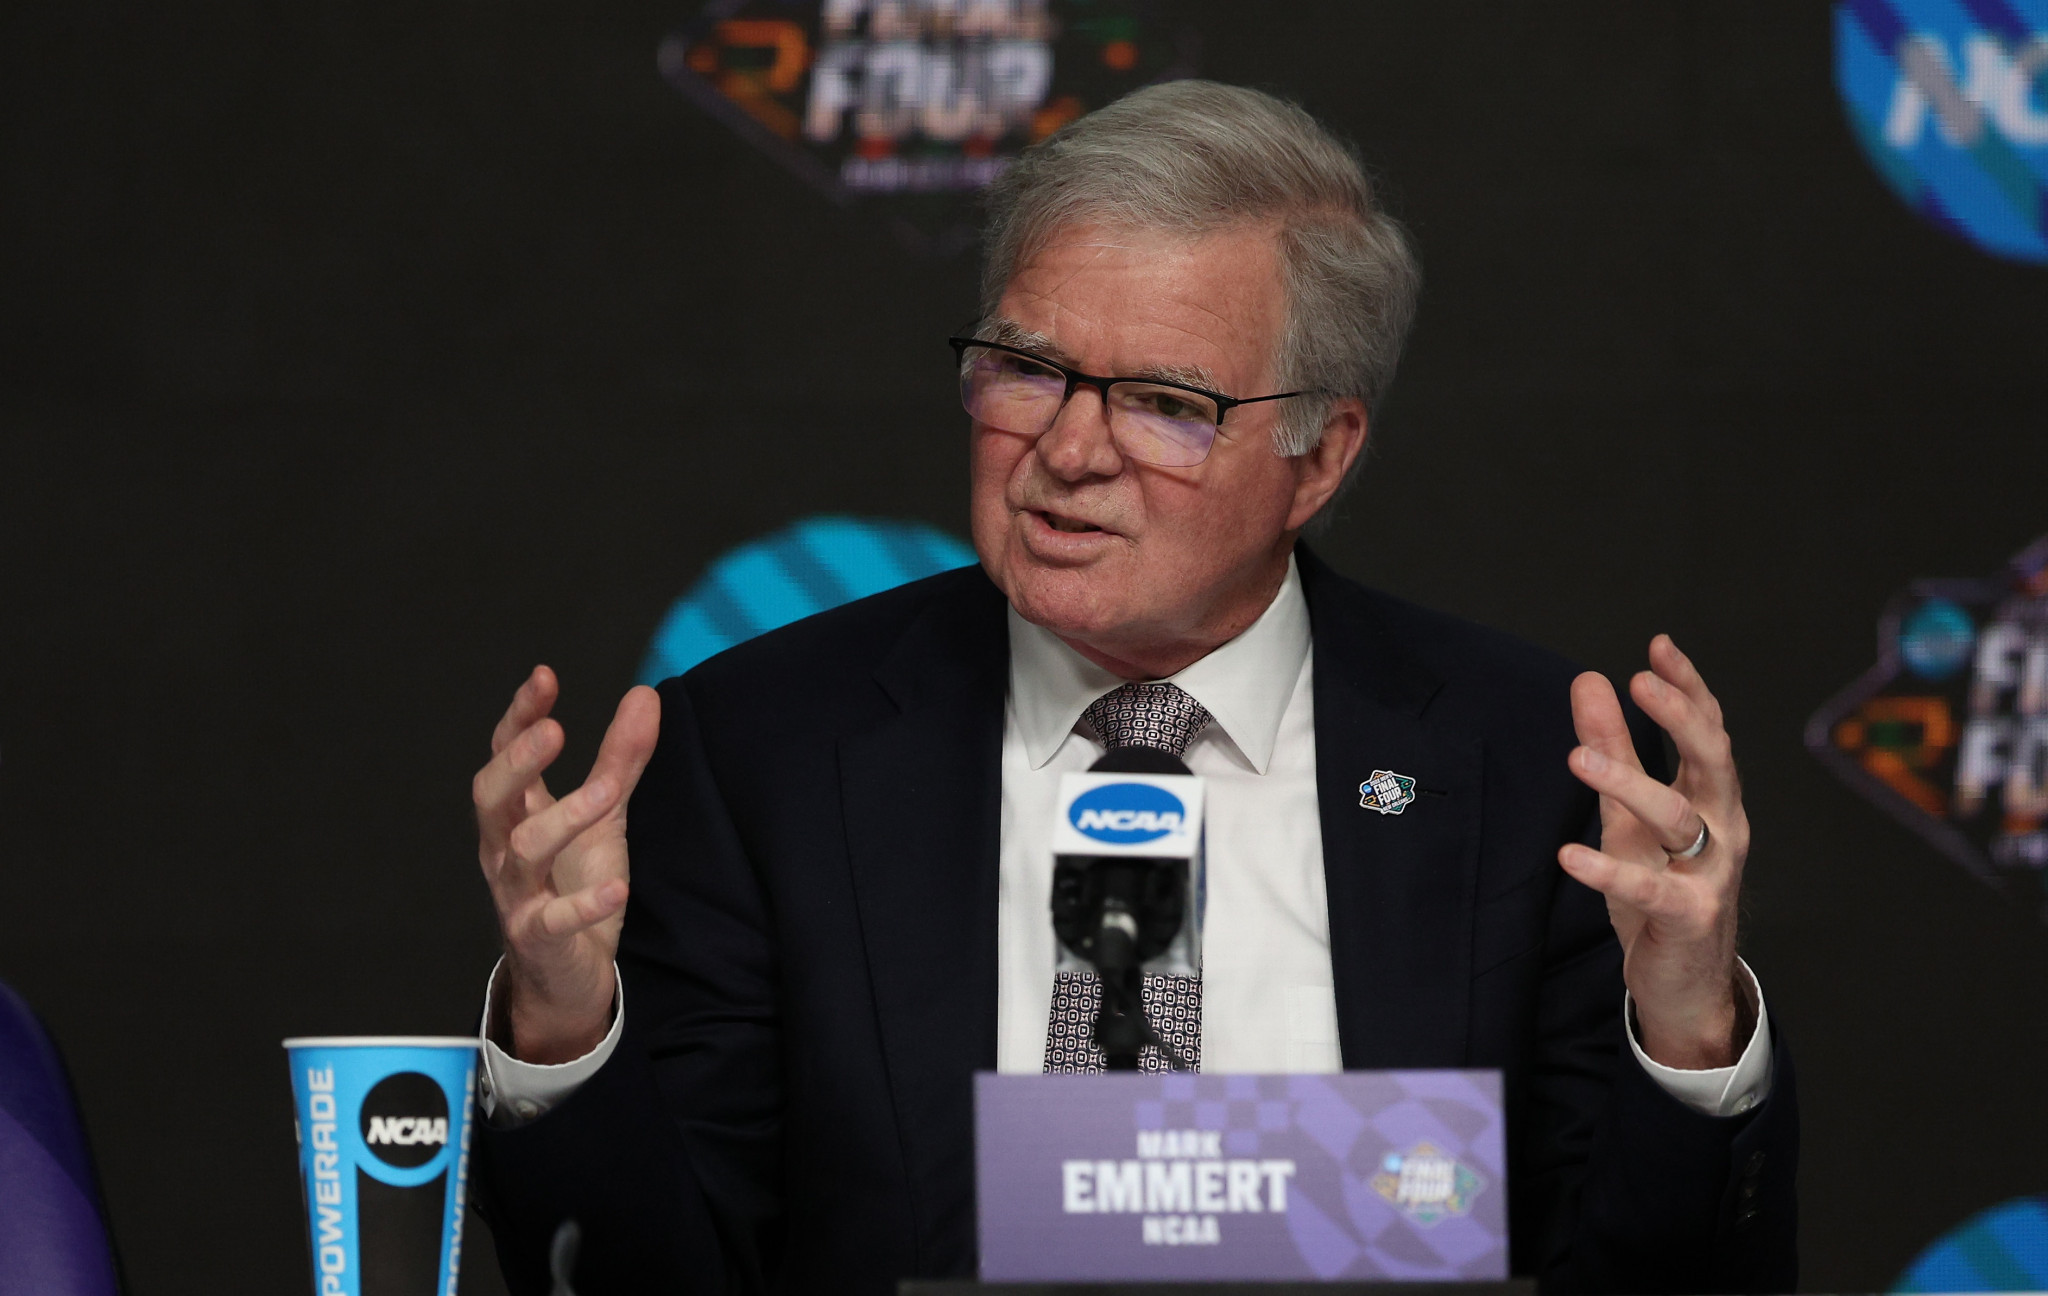 Emmert to end reign as NCAA President by June 2023